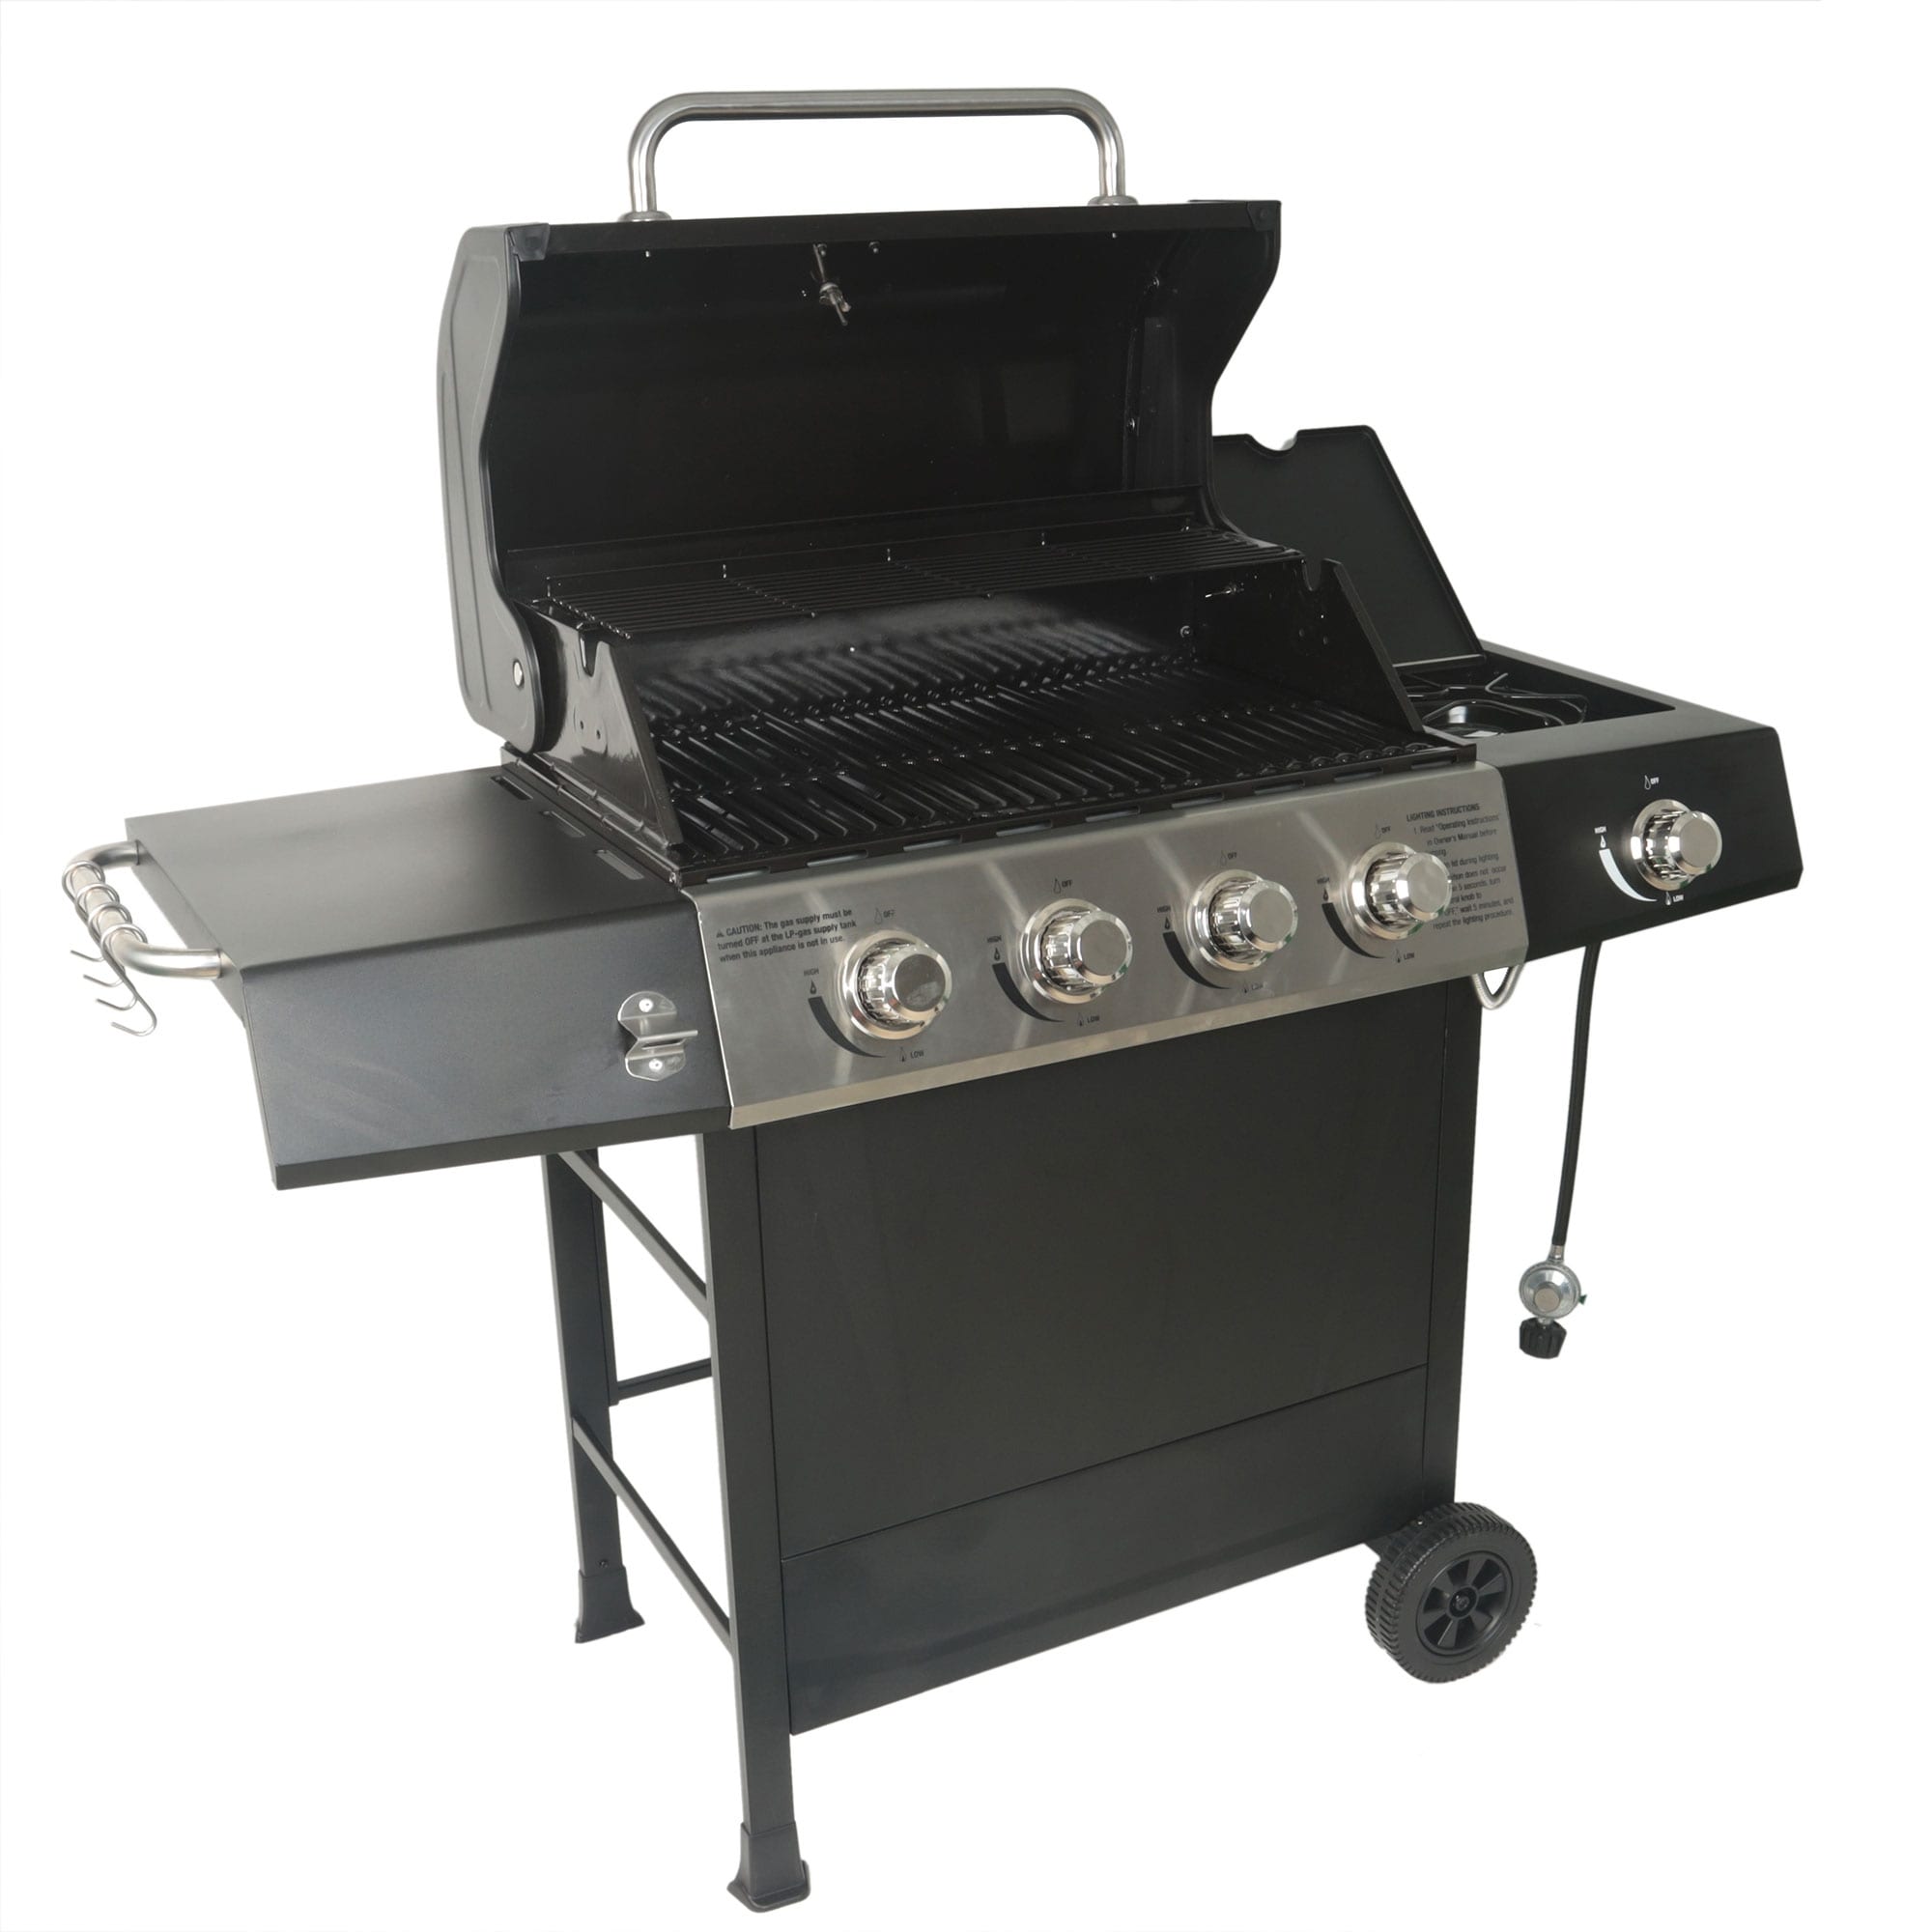 https://ak1.ostkcdn.com/images/products/is/images/direct/3ee0c05324859f7ce9738e0c481ef3d3d9b3a431/Grill-Boss-4-Burner-Gas-Grill-with-Side-Burner%2C-Cover%2C-Shelves%2C-%26-Bottle-Opener.jpg